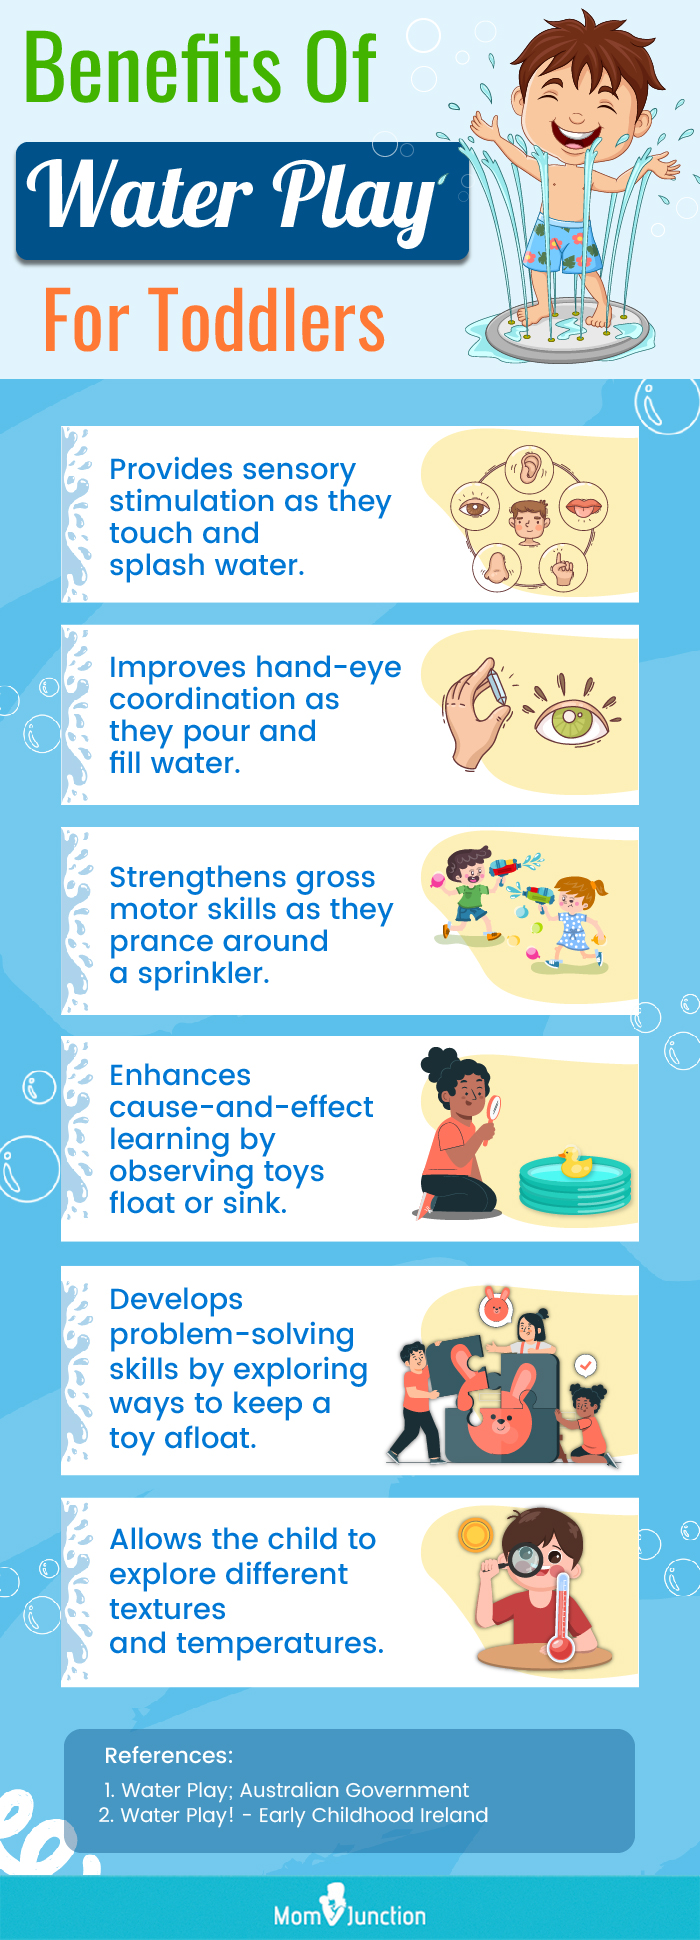 Benefits Of Water Play For Toddlers (infographic)